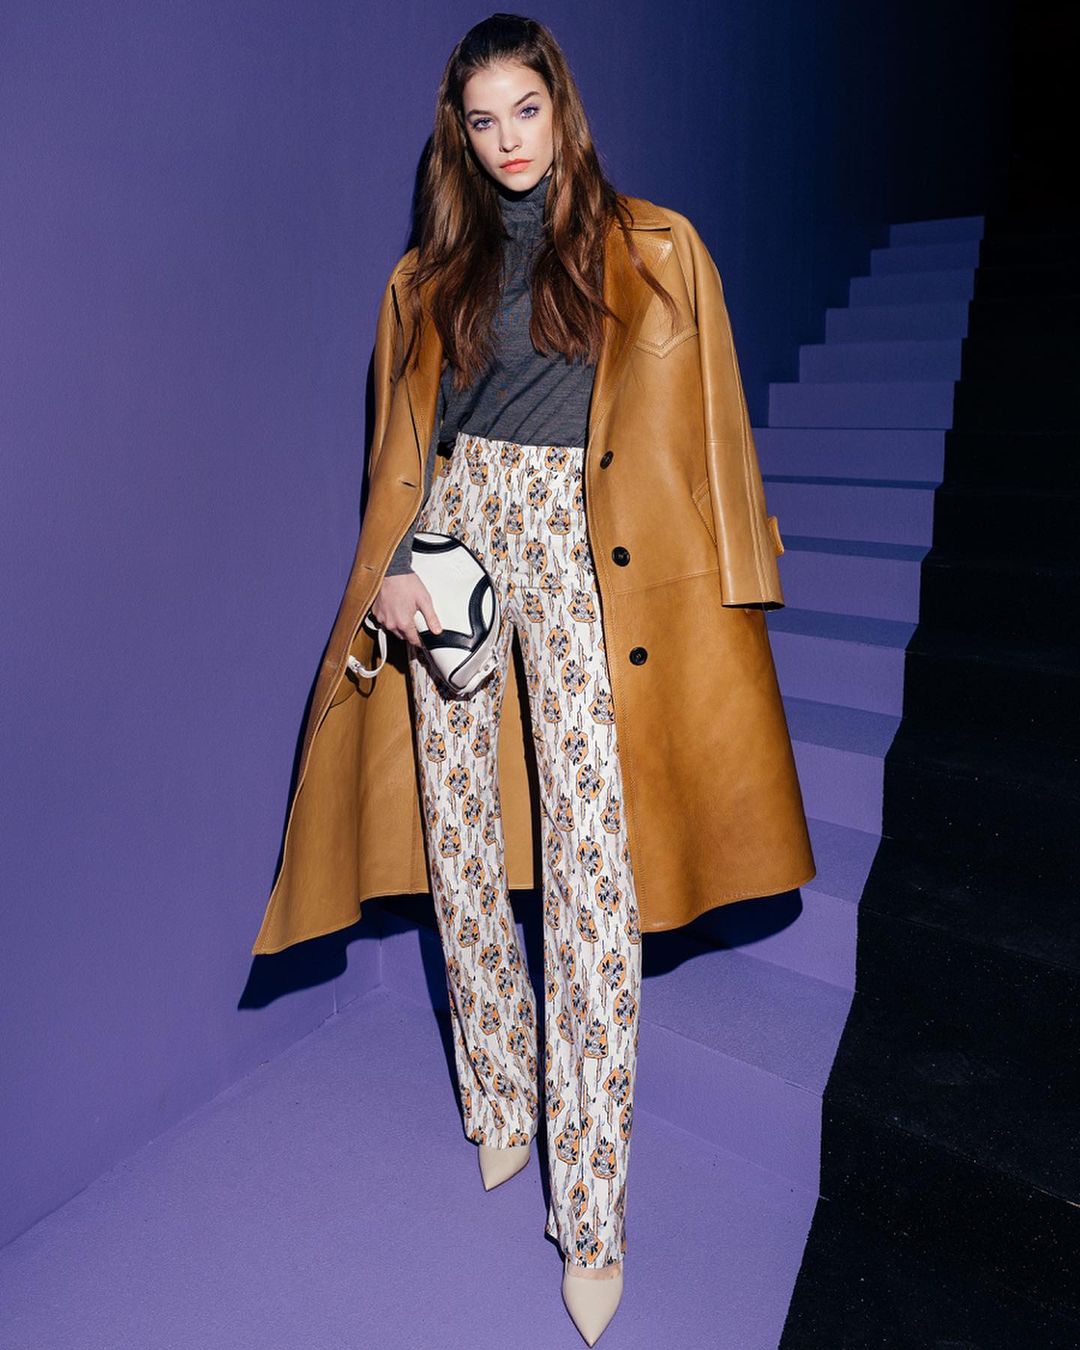 Classy Babe In Highneck Top & Printed Pants Topped With Golden Brown Long Coat